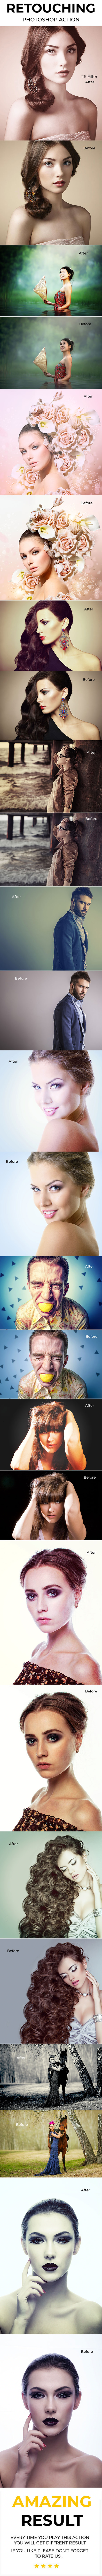 GraphicRiver Retouching Photoshop Action 21164253